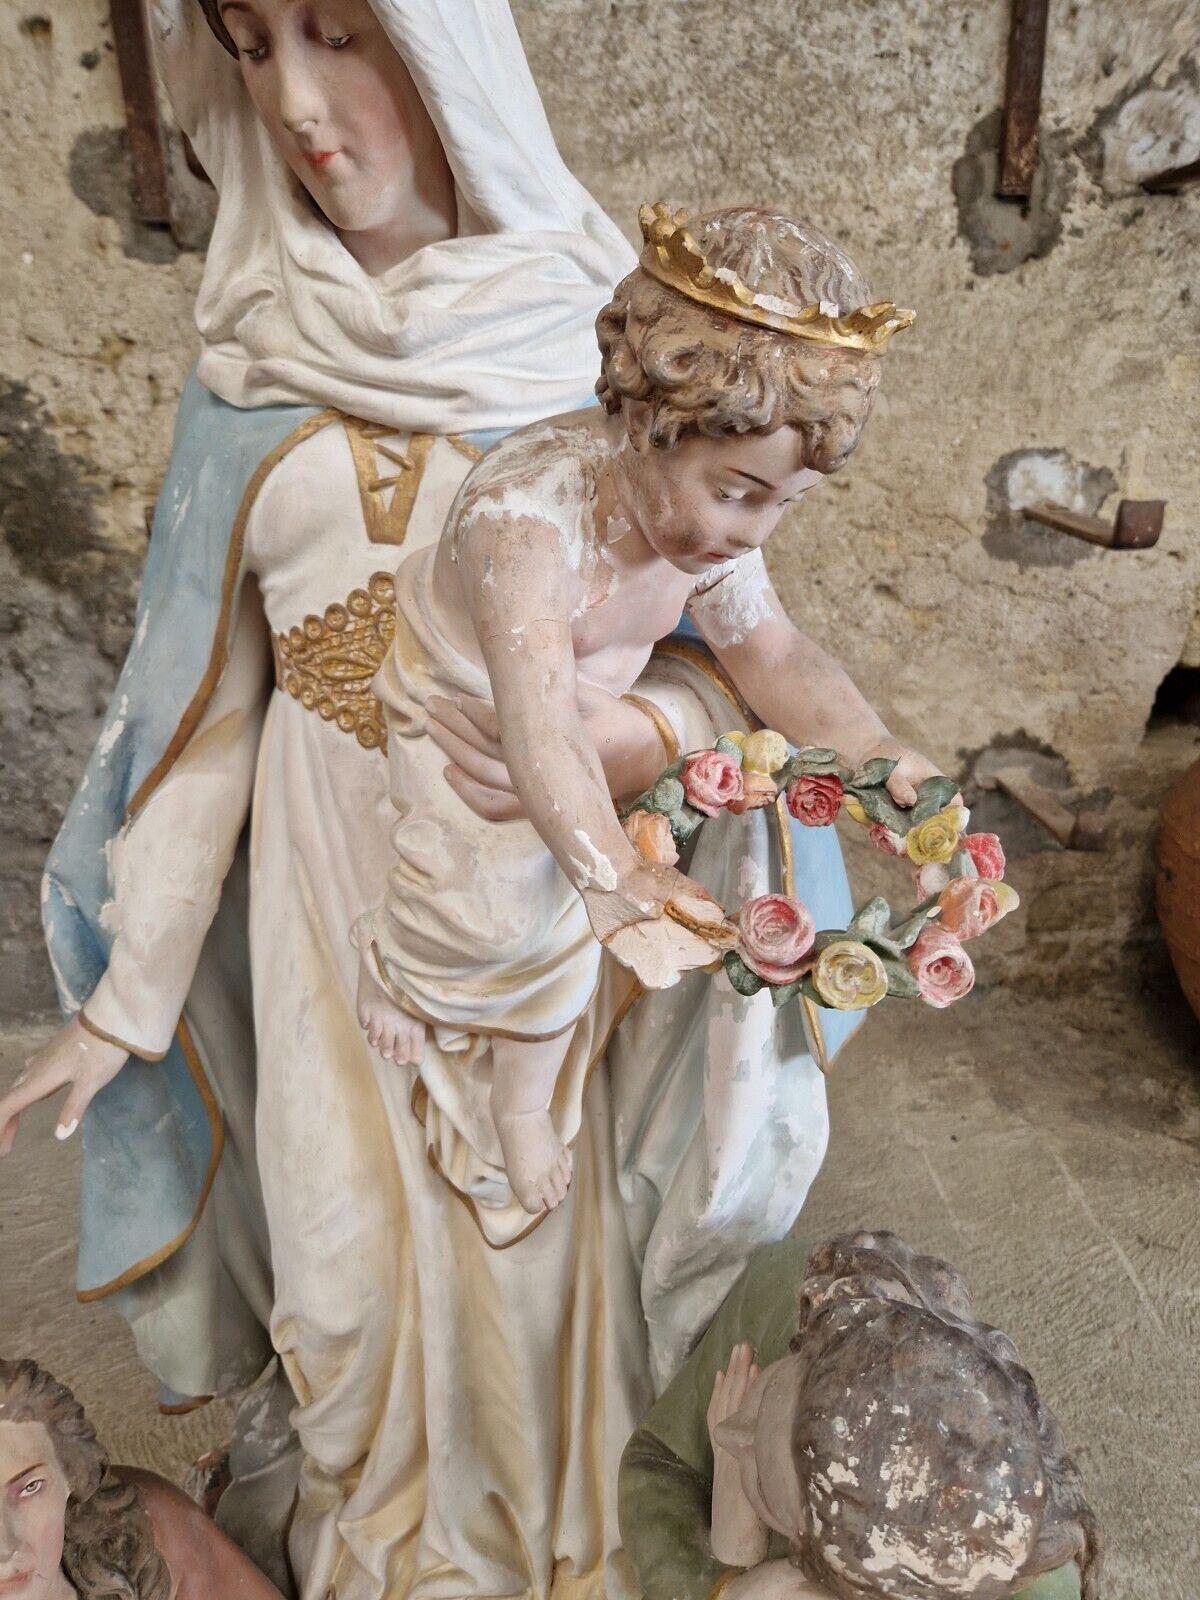 *RARE*
We offer for sale this Fantastic Shrine Statue from a Parisian Church

This exquisite statue of Our Lady of Purgatory is a masterpiece of religious art. Created in France during the historicism period of 1850-1900, this large sculpture stands